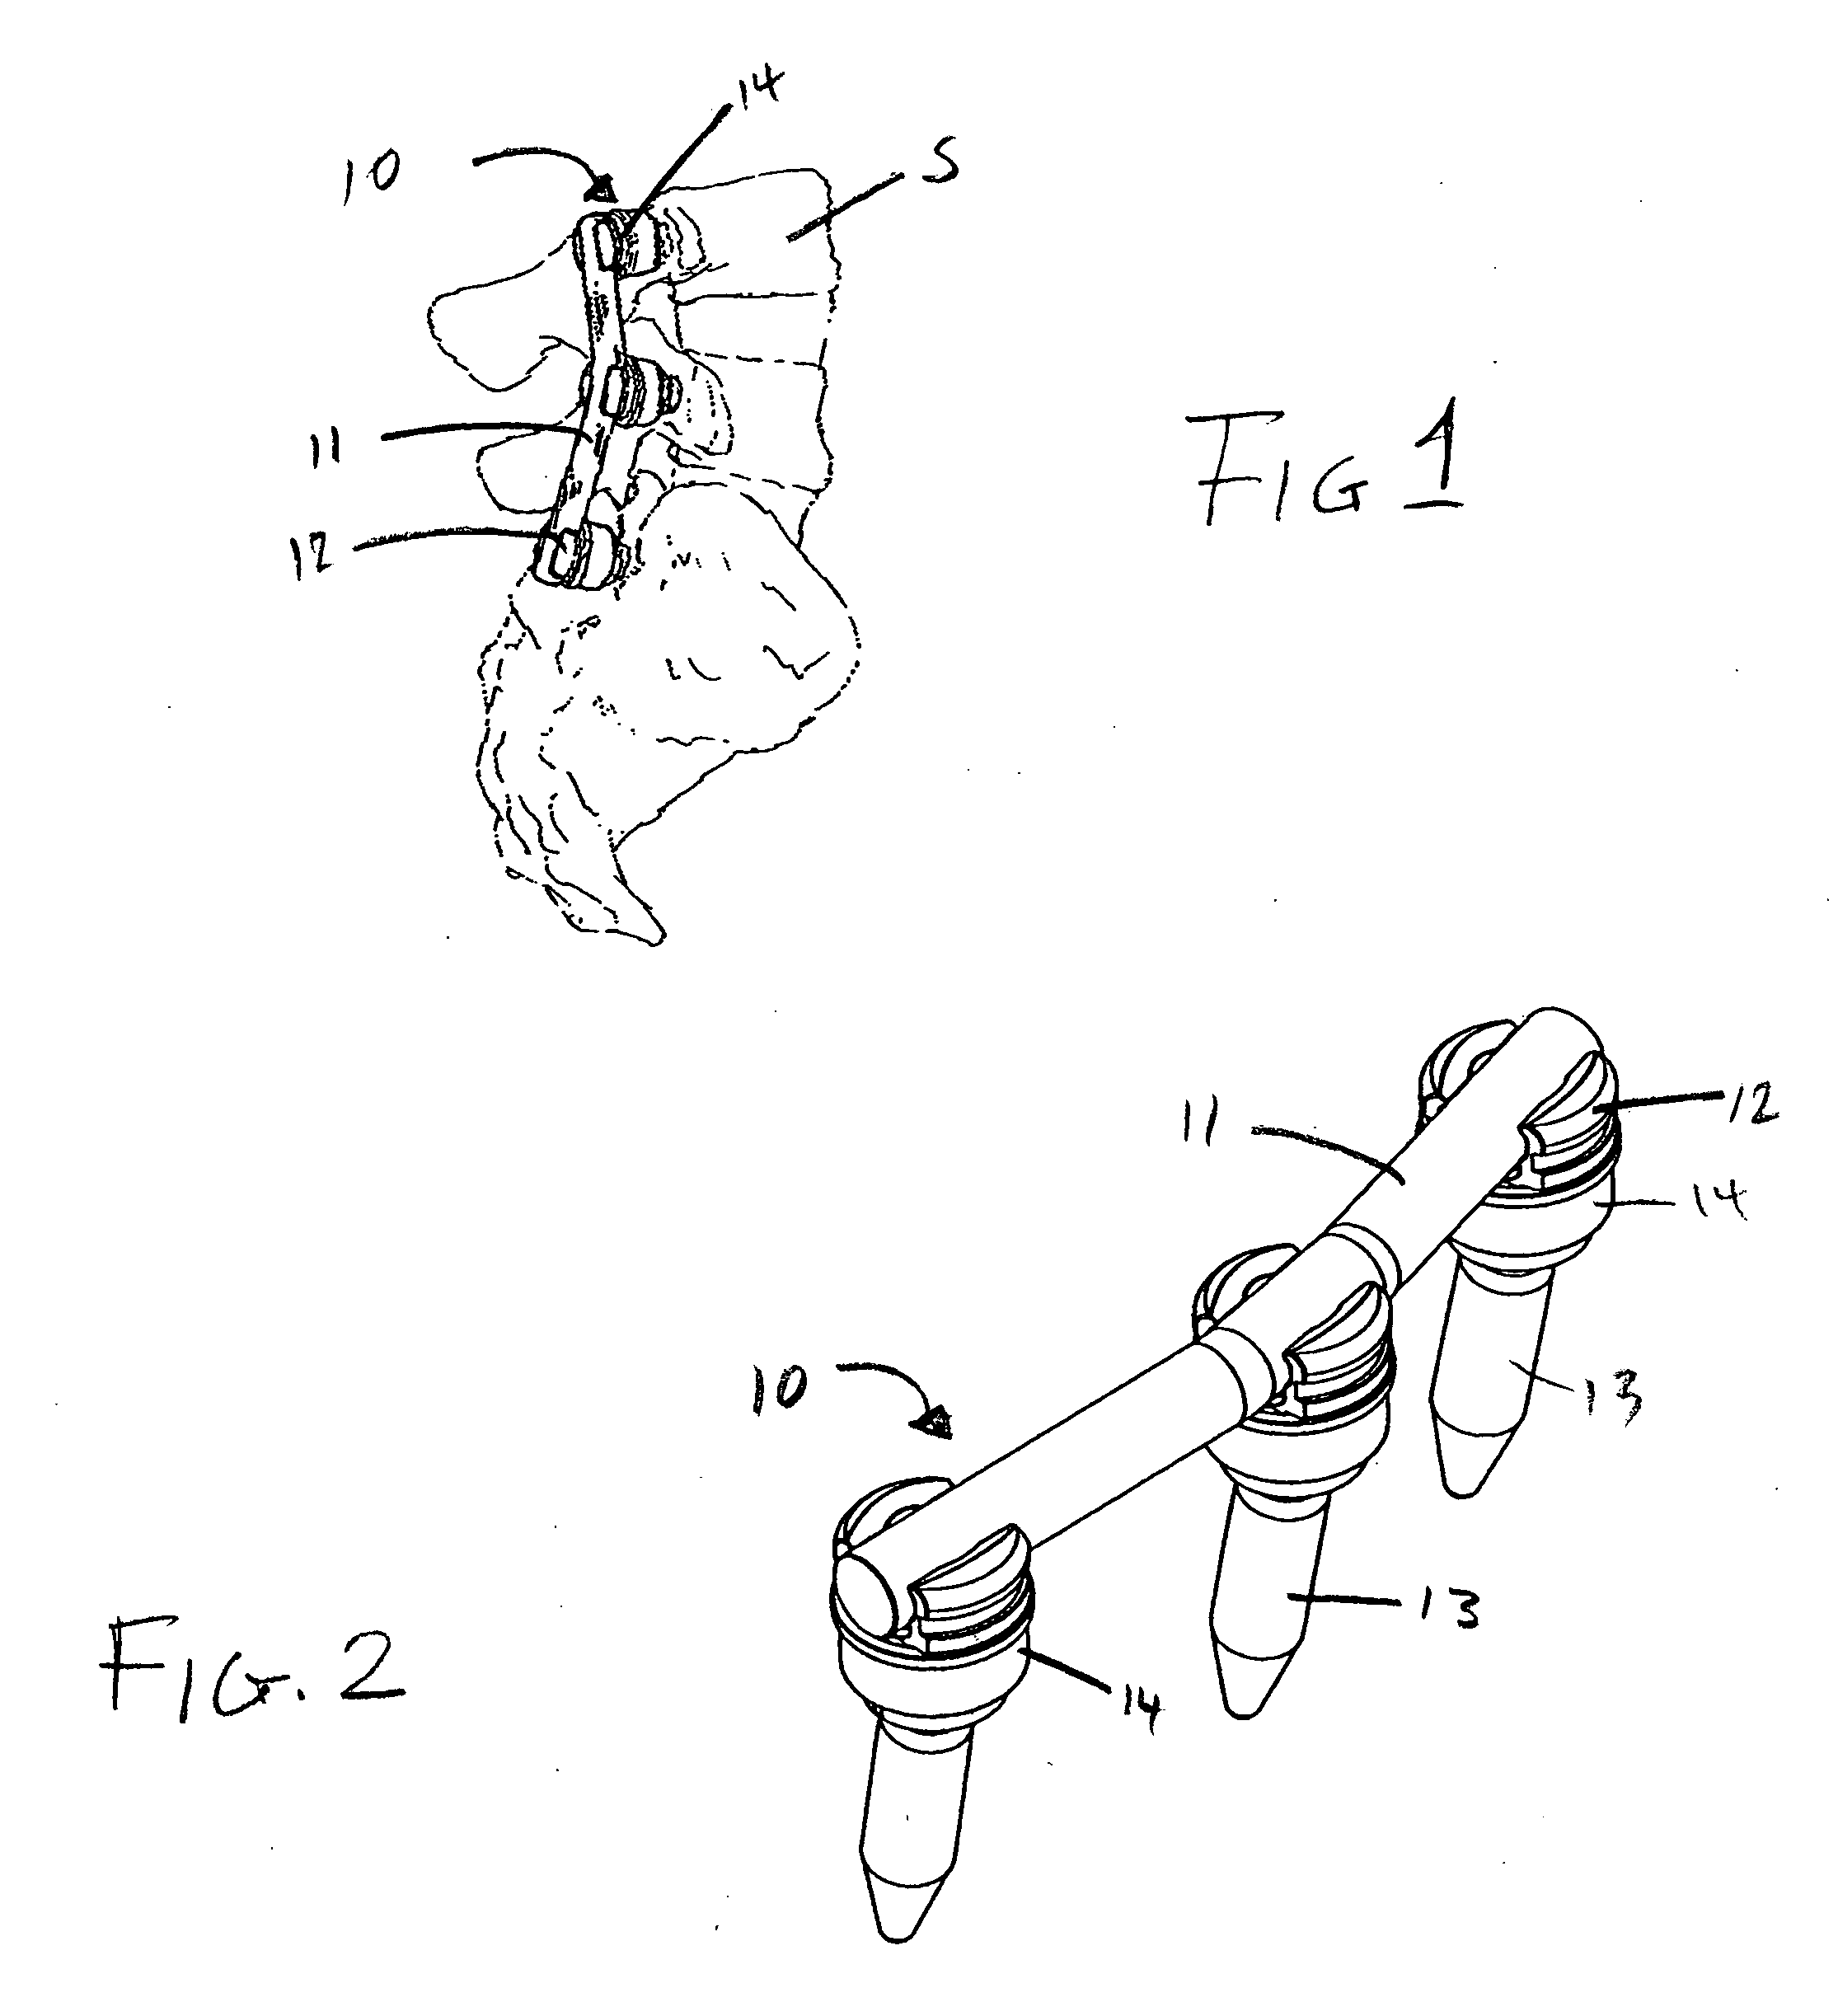 Bone fixation system with low profile fastener